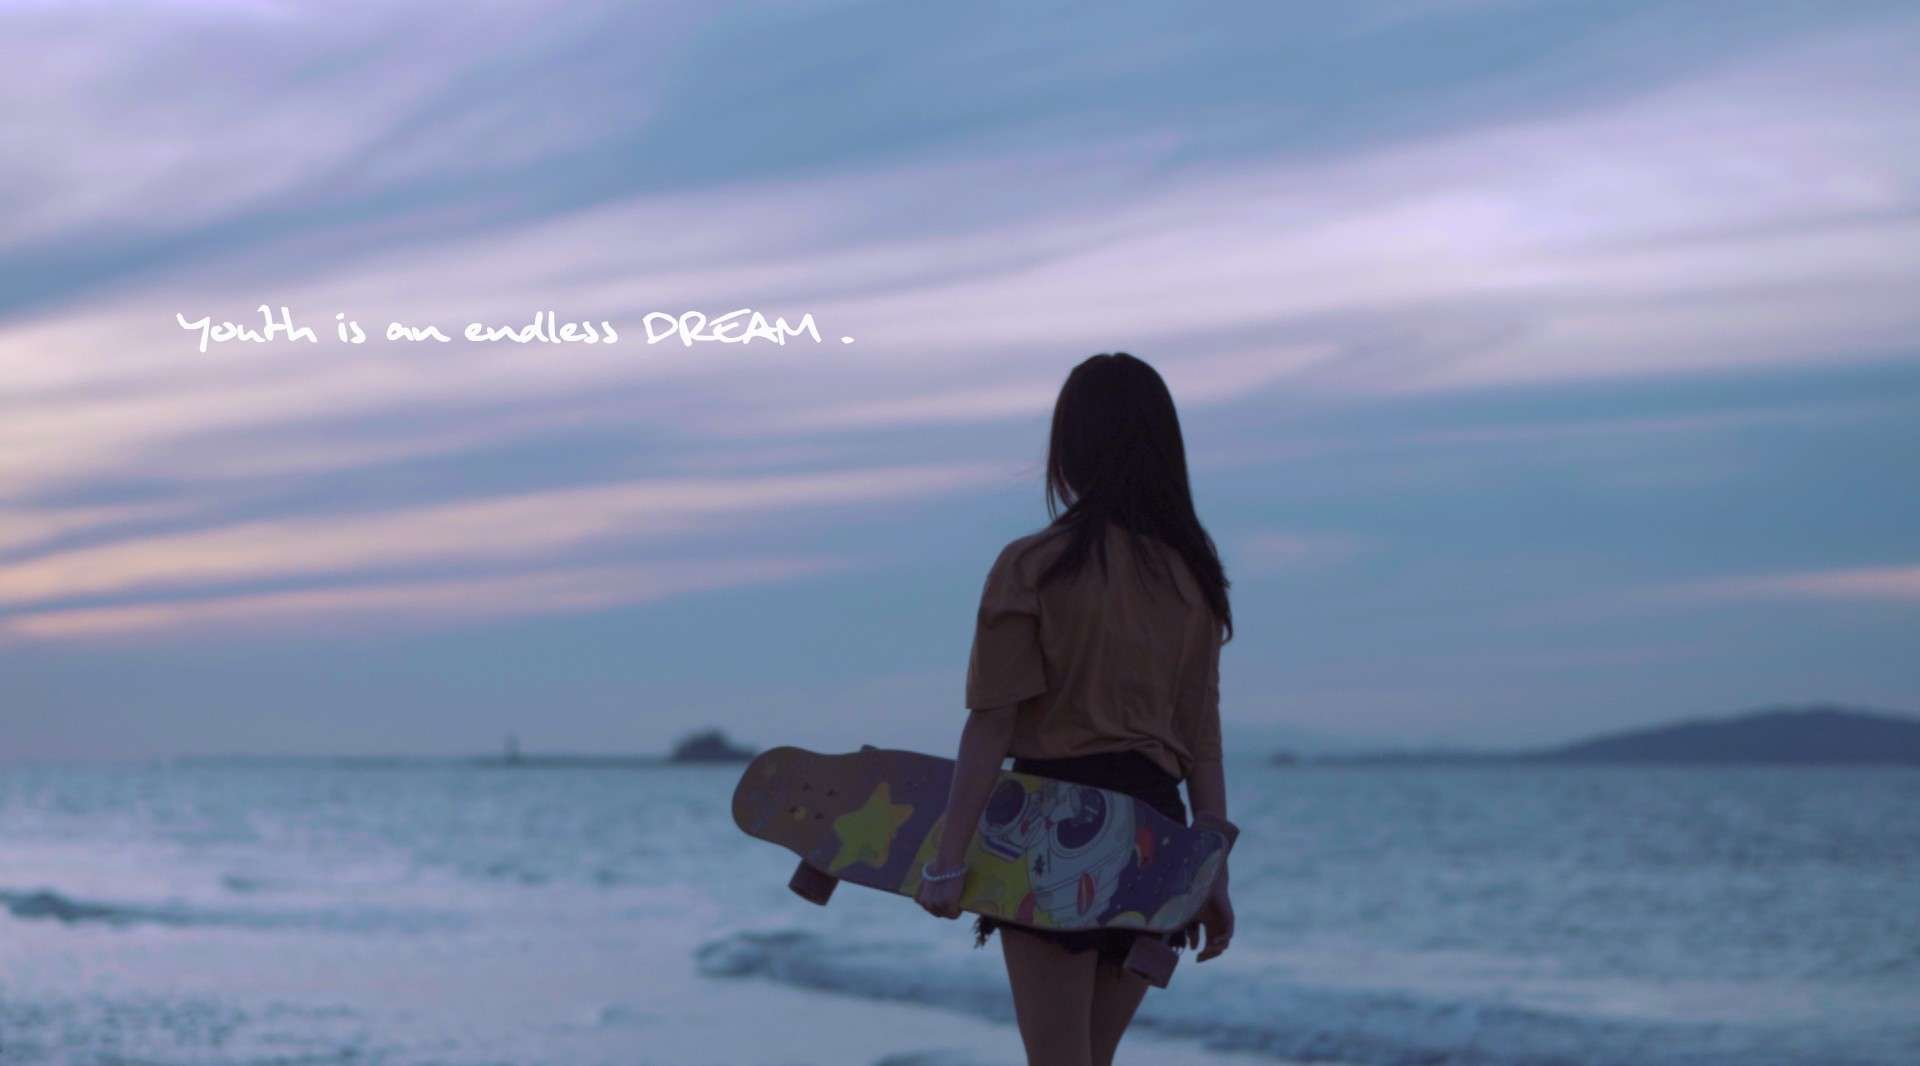 Youth is an endless DREAM 青春感滑板少女